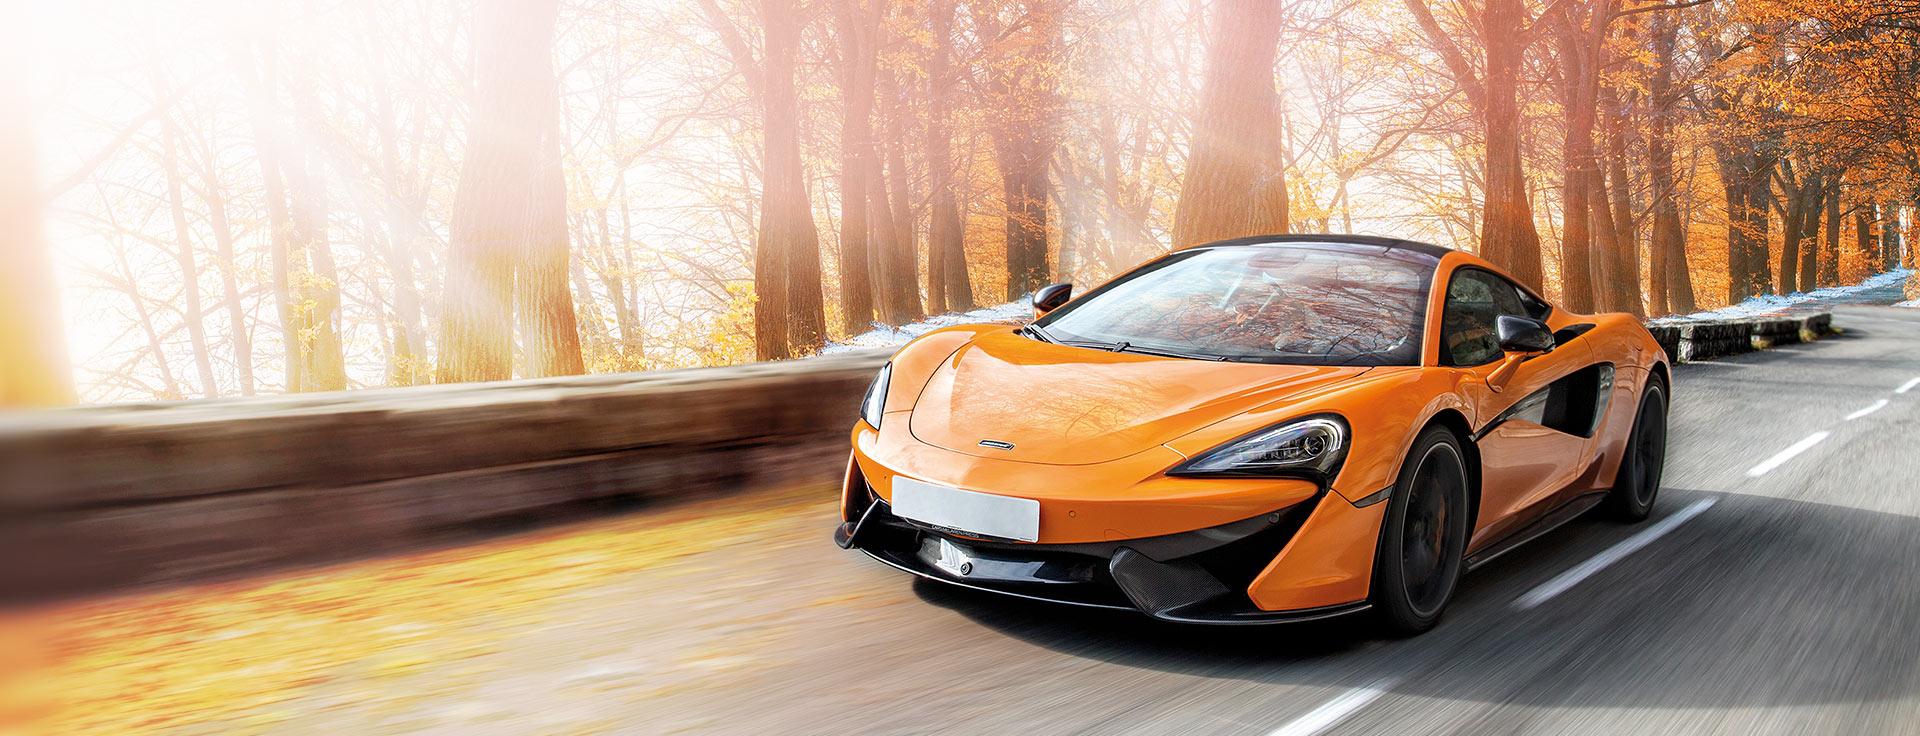 McLaren - Pirelli and McLaren: automotive technology partners from race to road